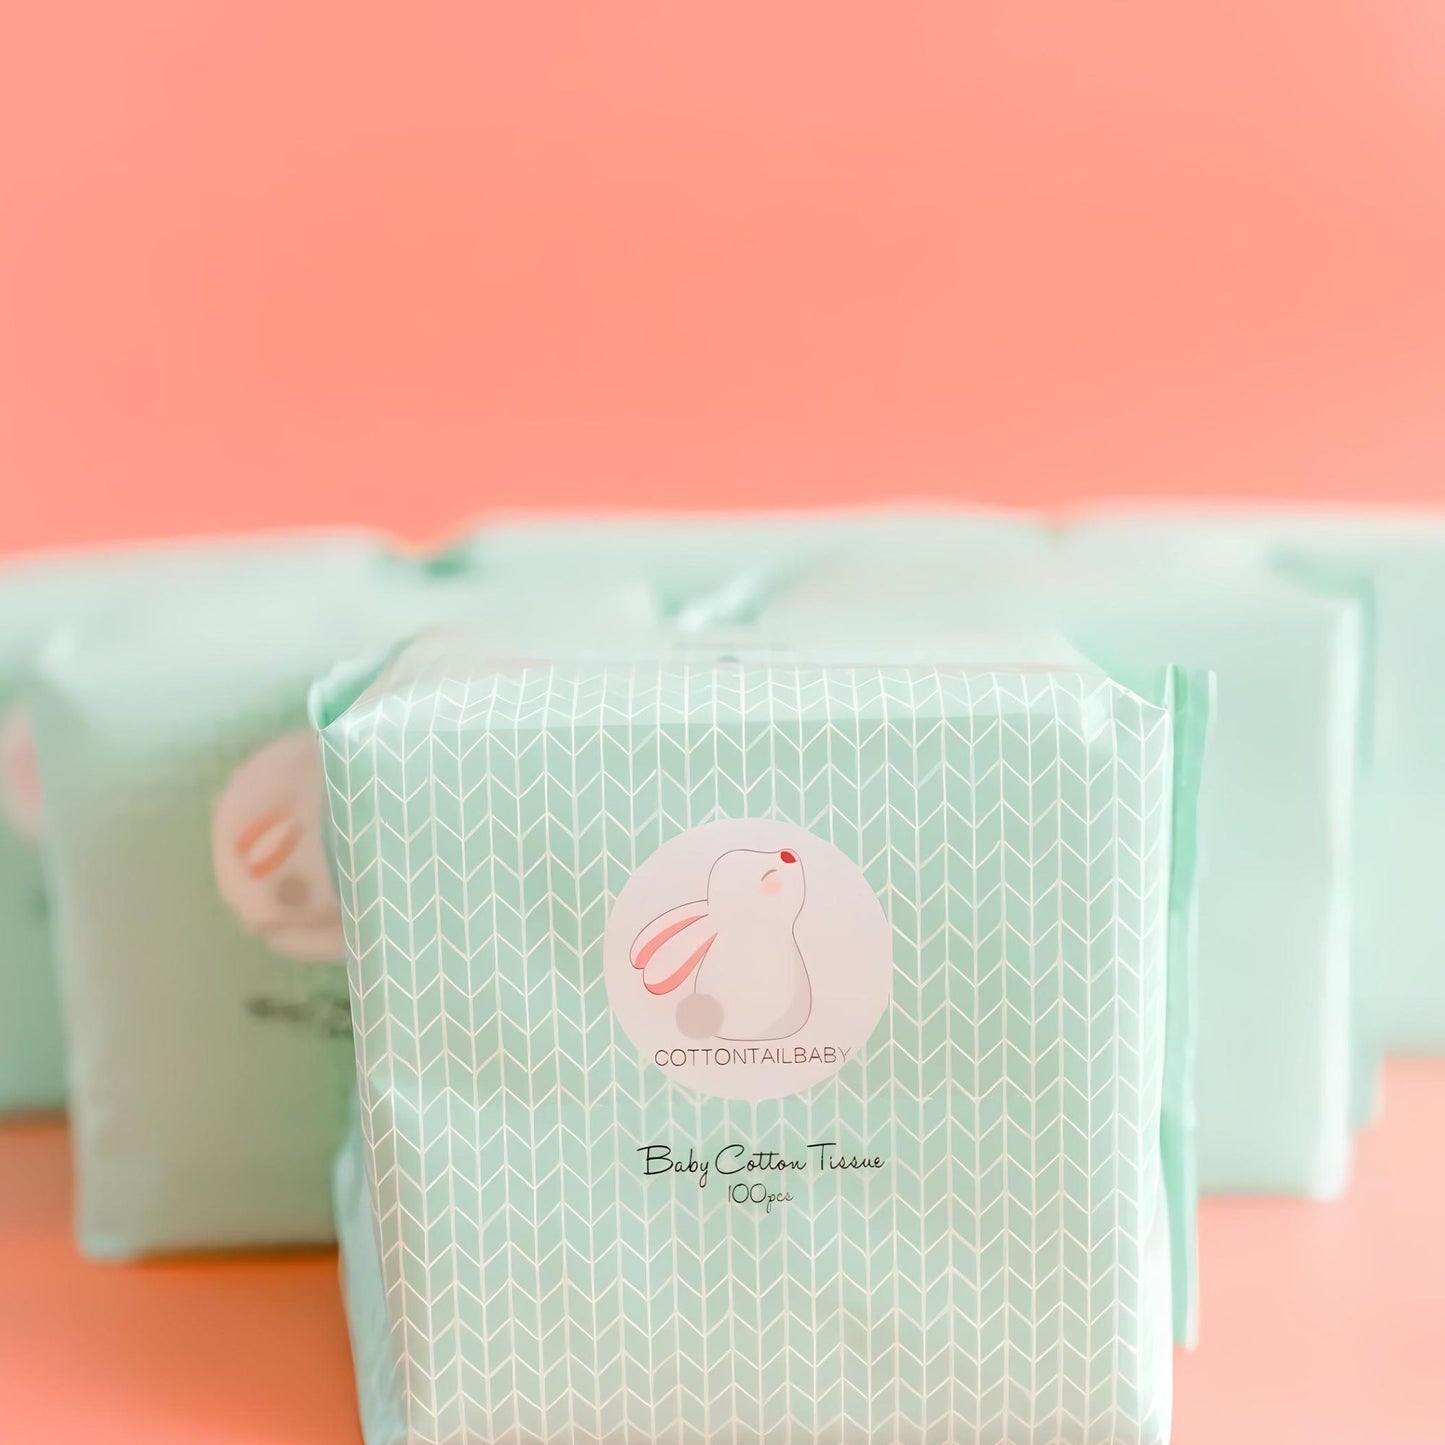 Cottontail Baby Hypoallergenic Dry Wipes